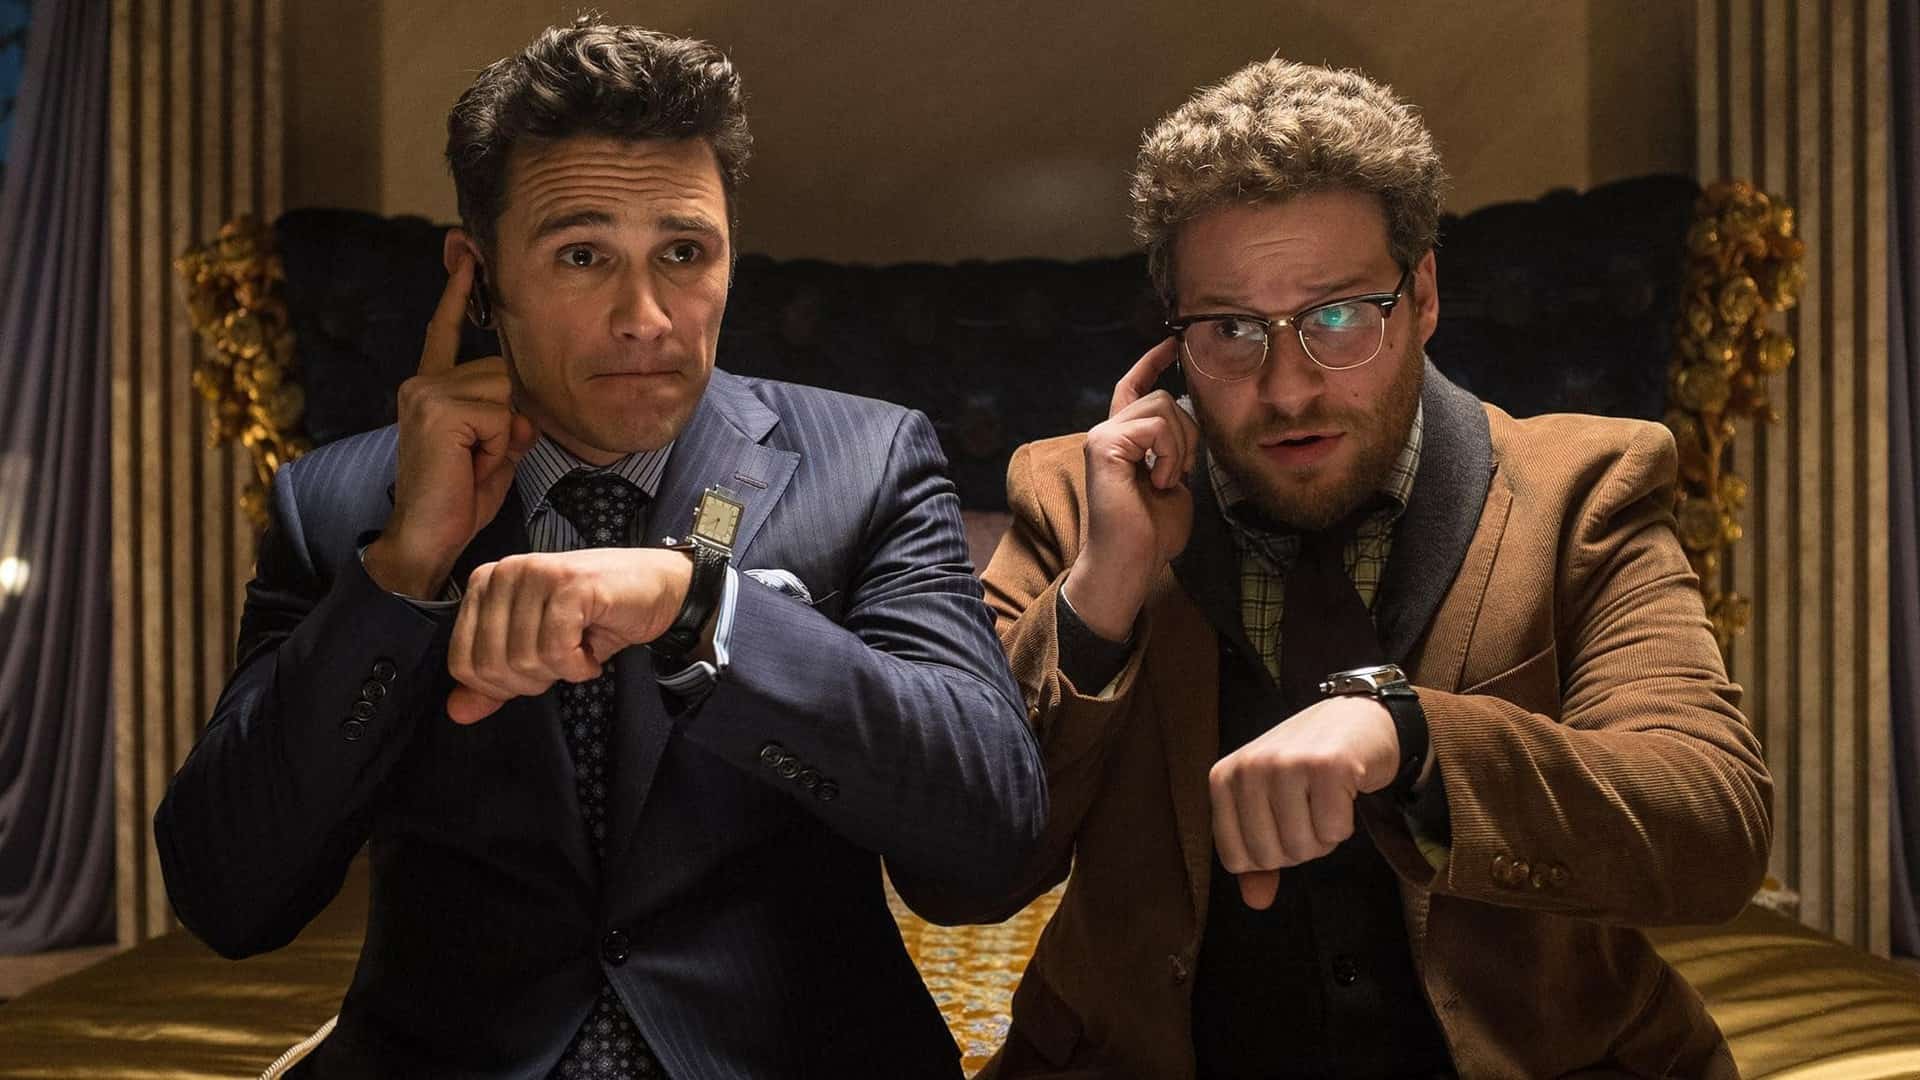 THE INTERVIEW PHOTO